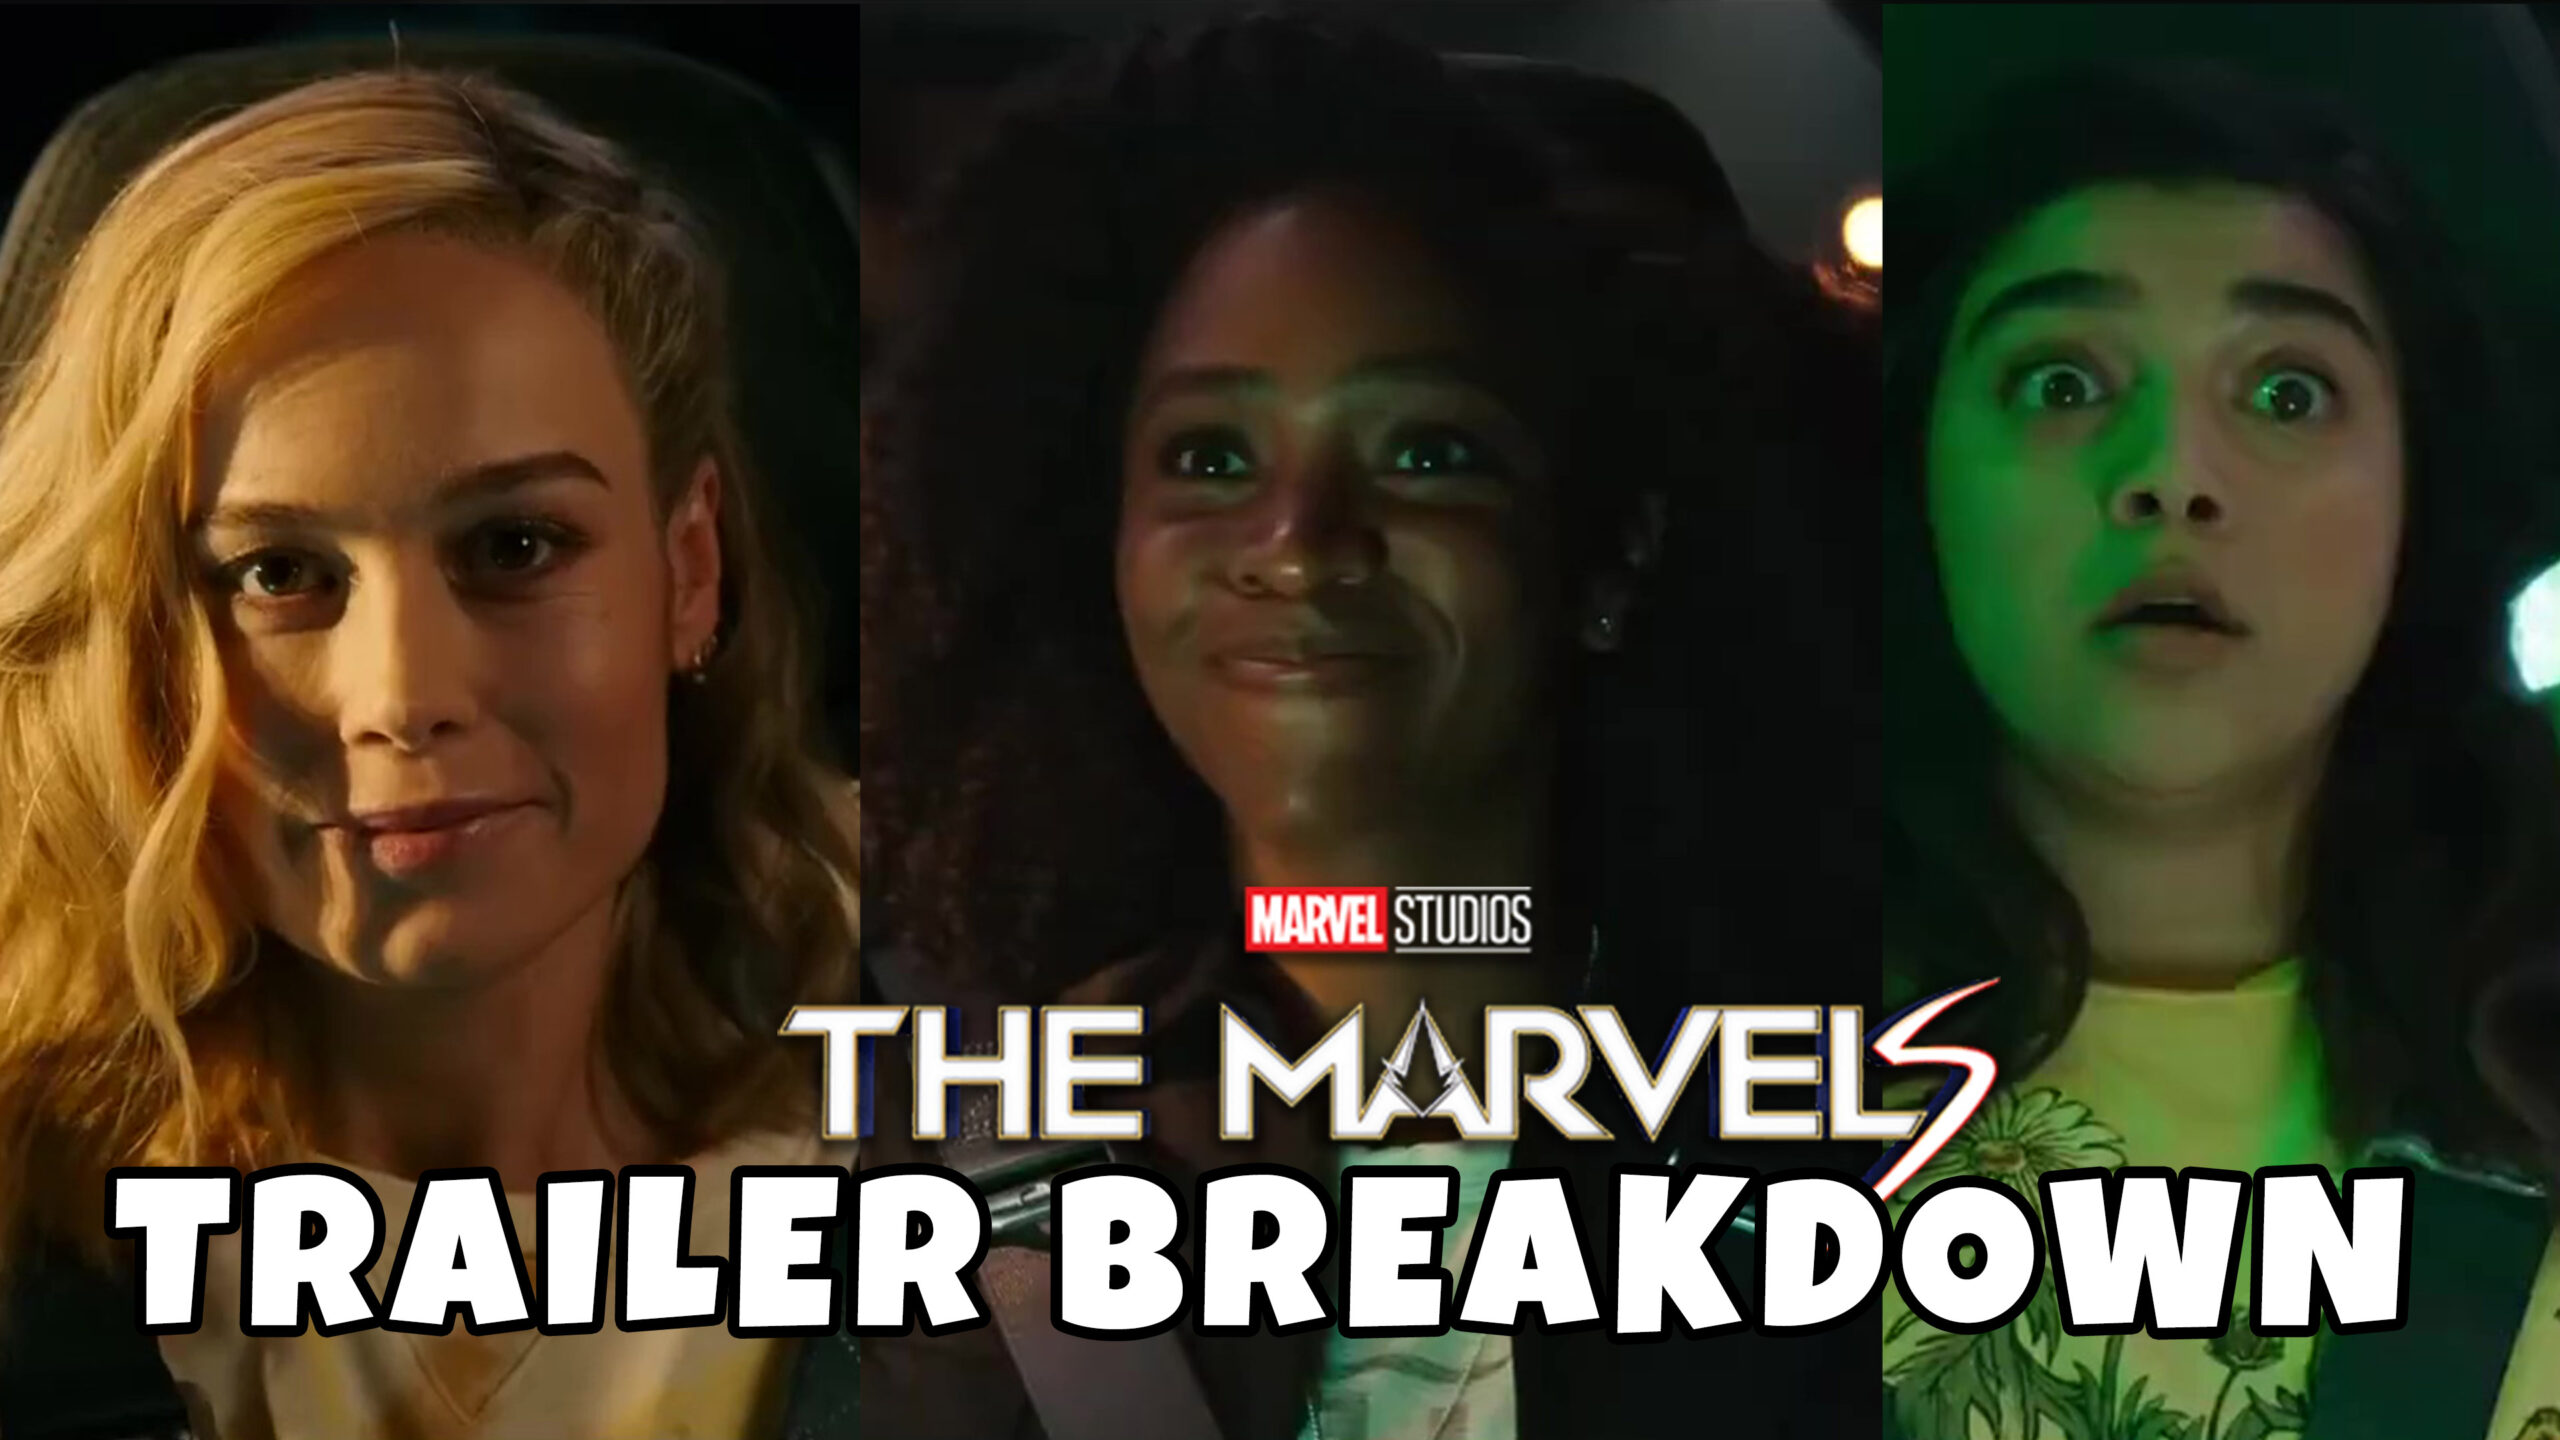 The Marvels Trailer Breakdown: Details You Might Have Missed!